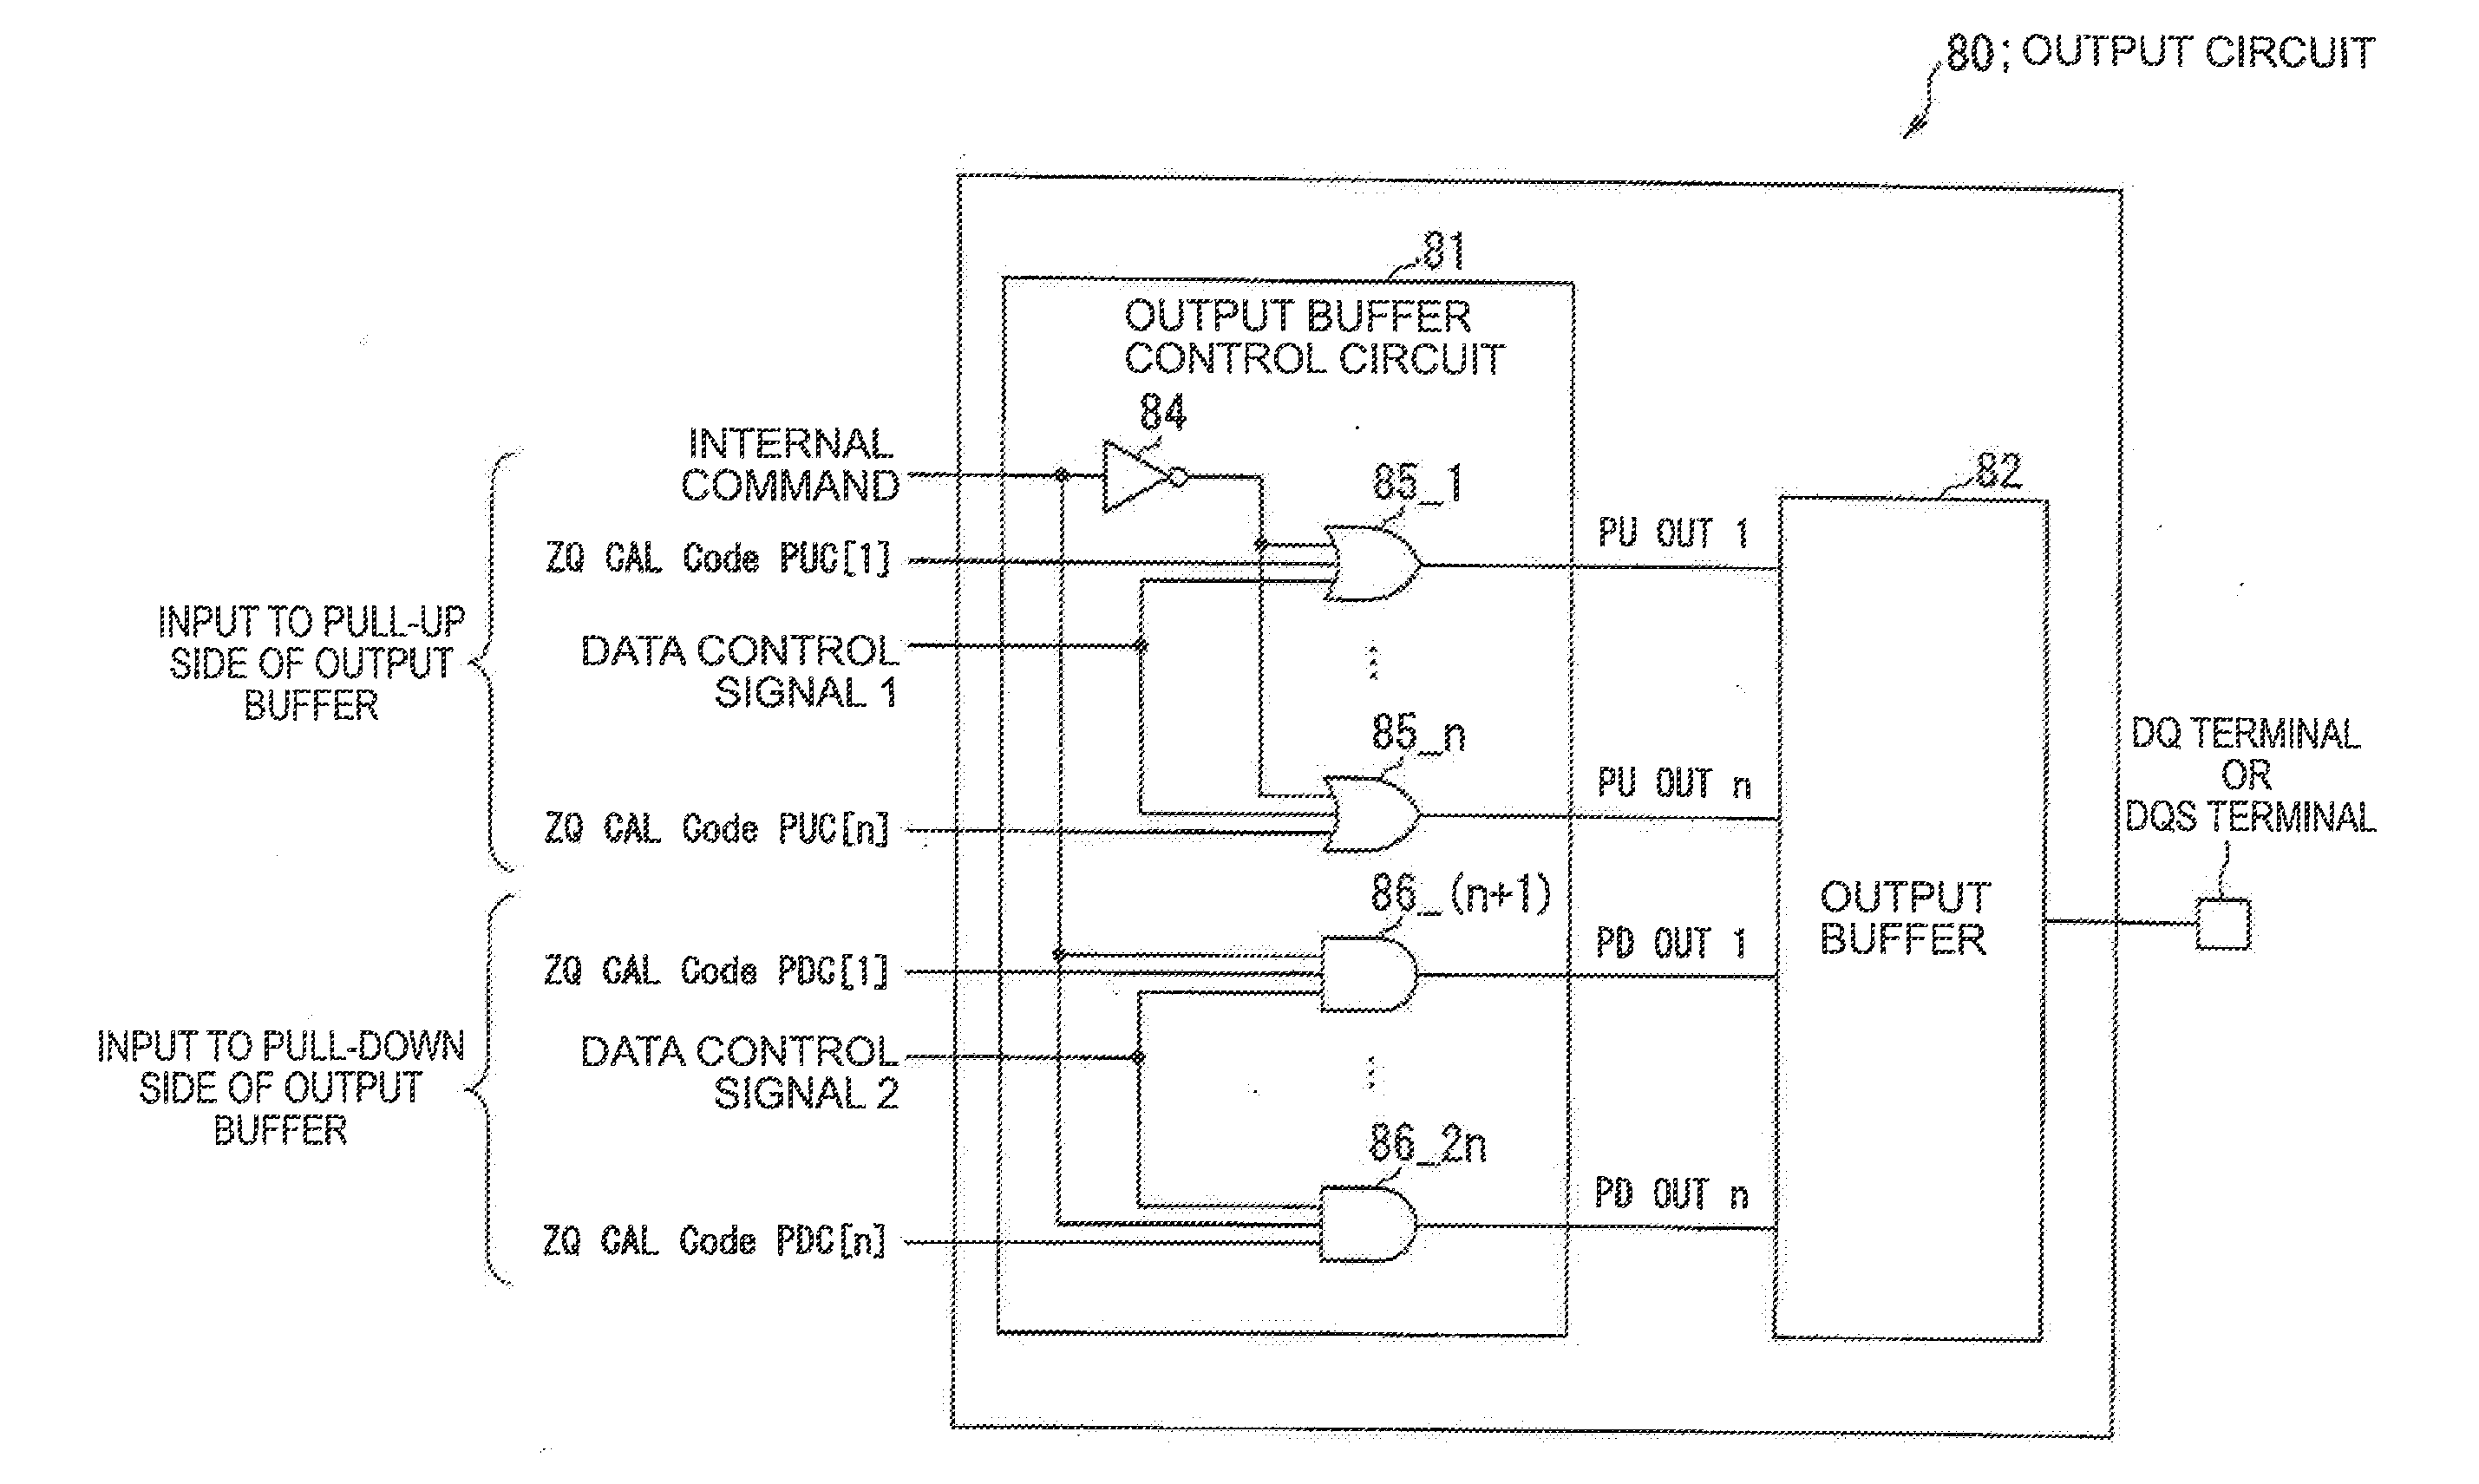 Semiconductor device and method of adjusting an impedance of an output buffer